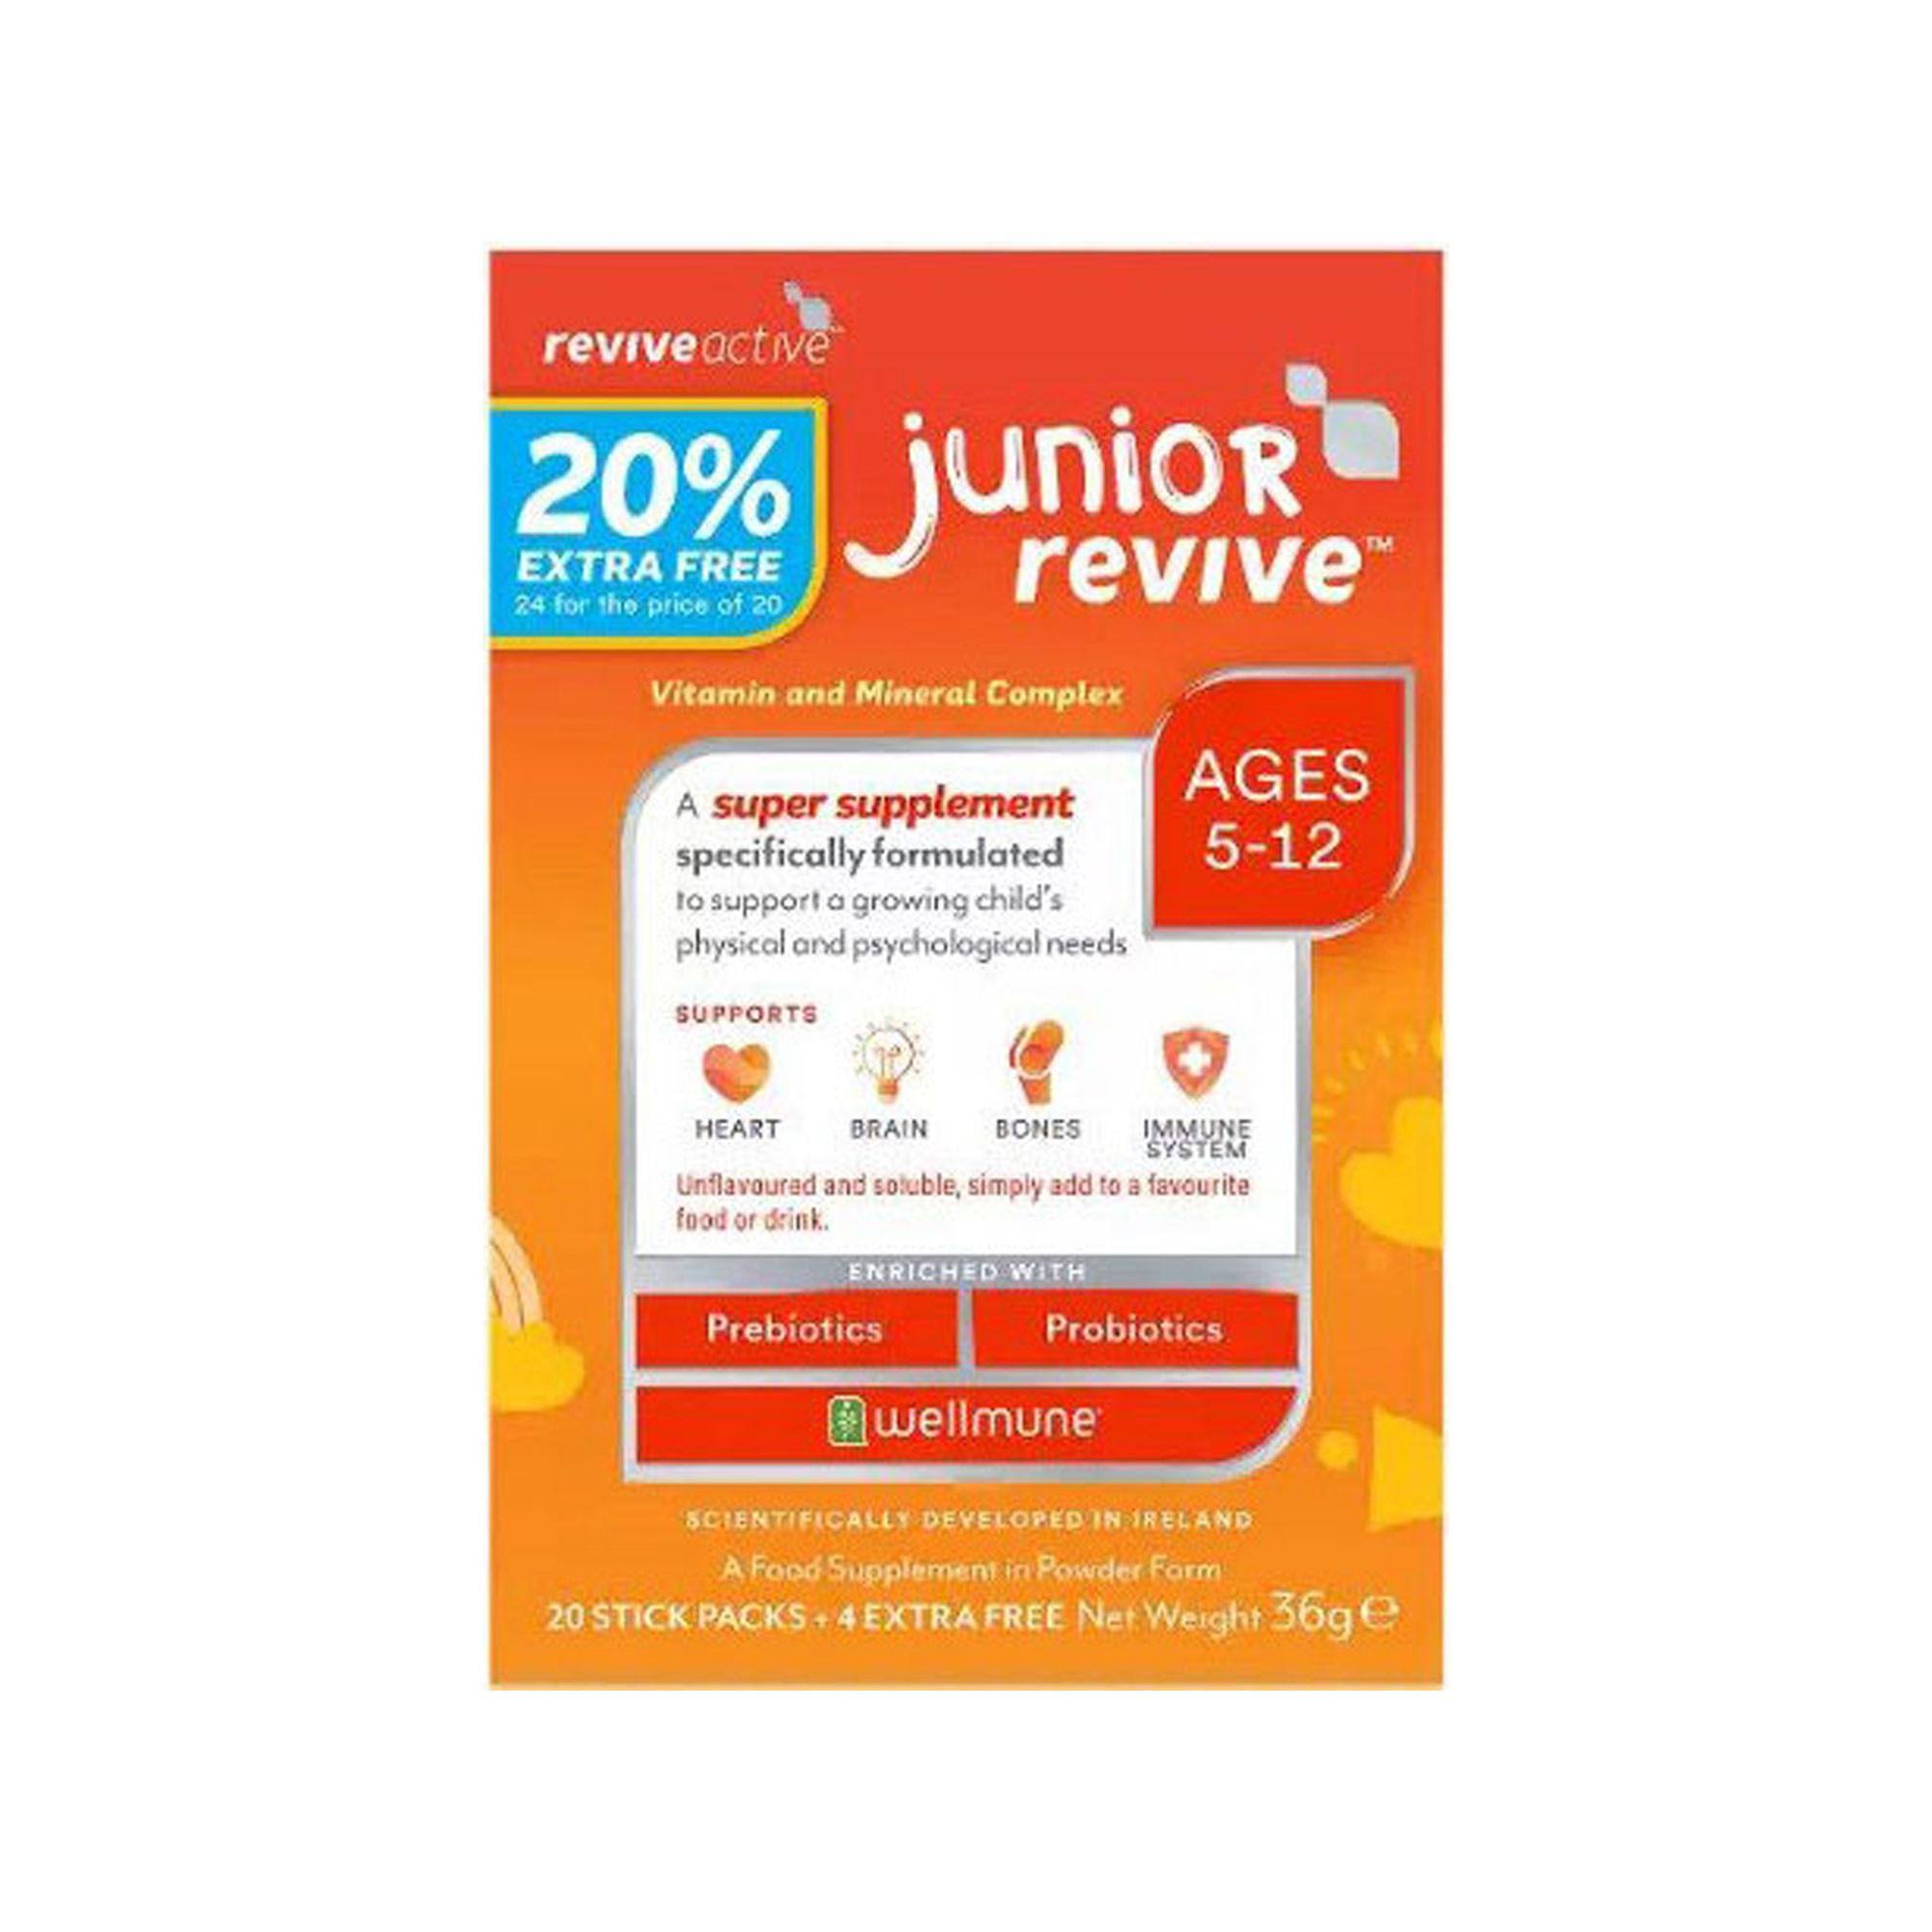 Revive Active Junior Revive 20% Extra Free